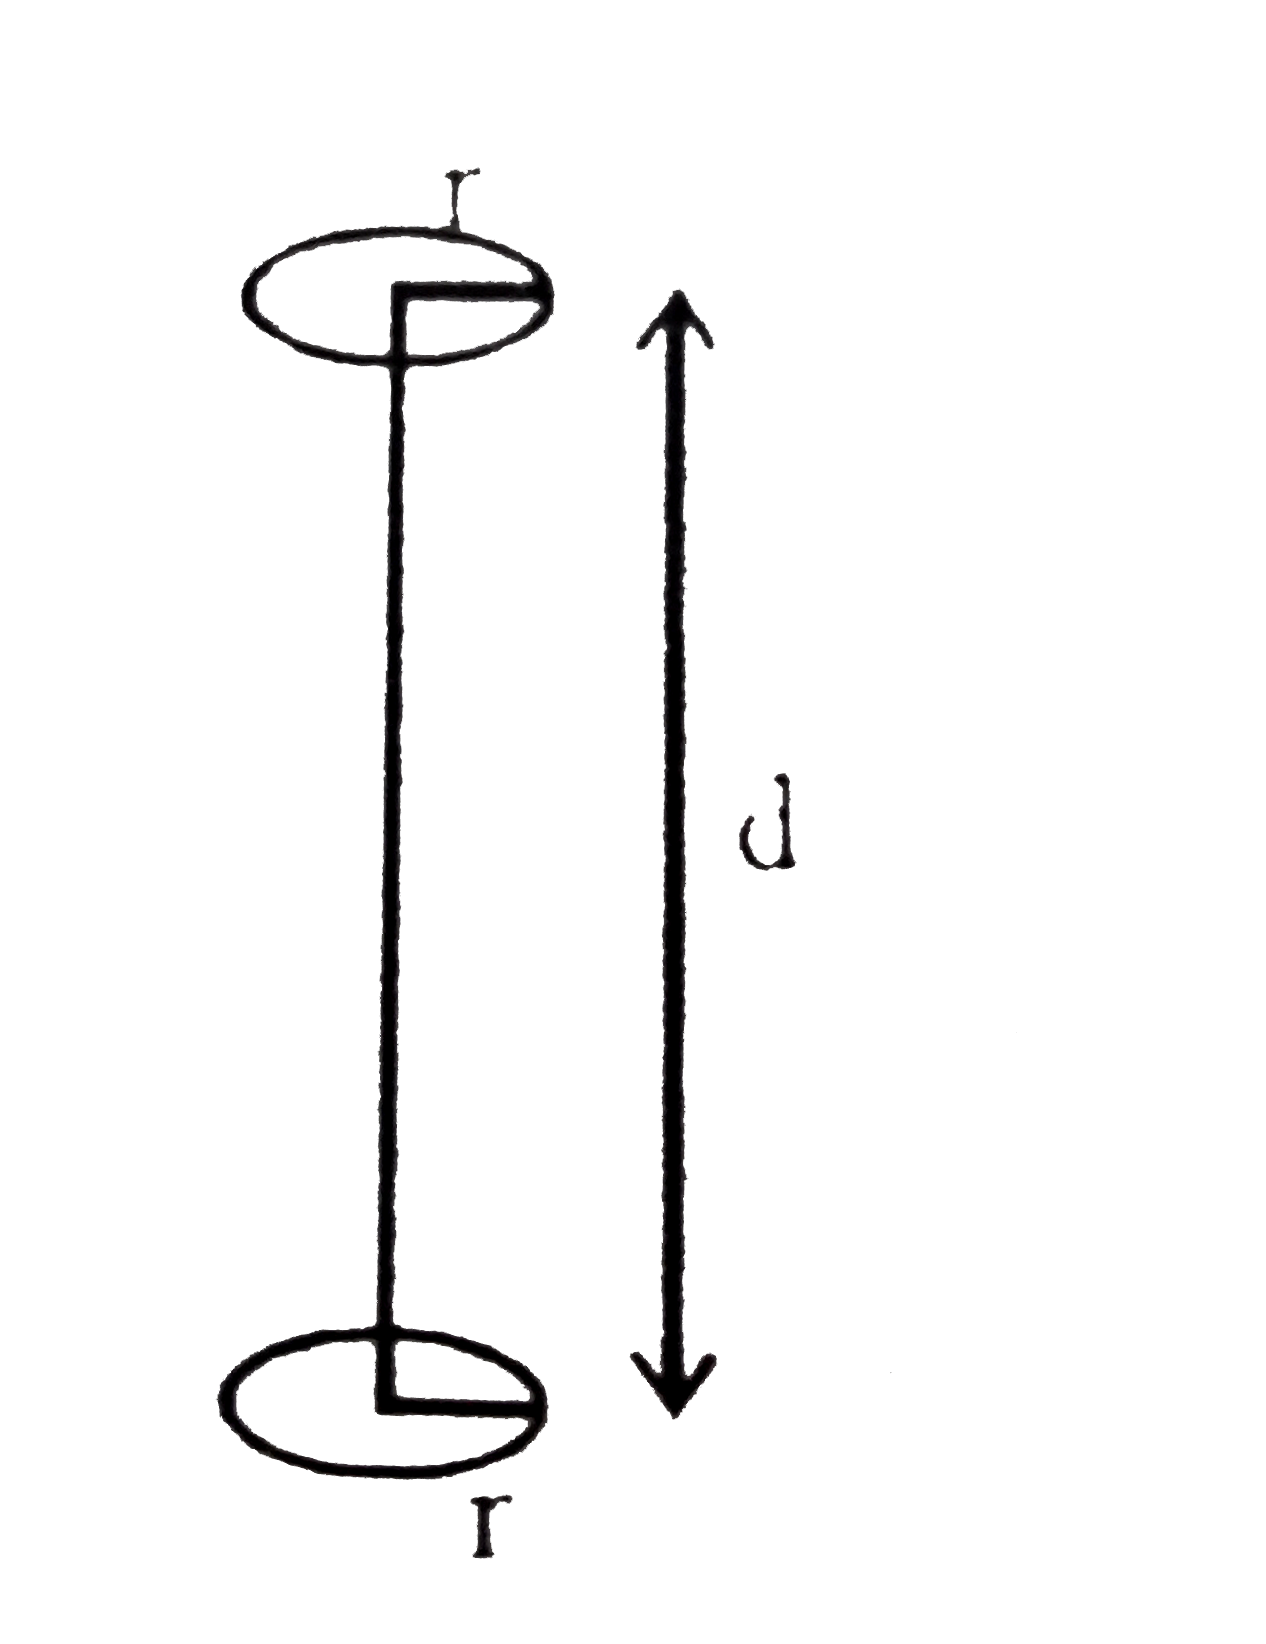 Two current carrying coil having radius 'r' are seperated by distance 'd' as shown in diagram. If  rlt ltd. Then find the force between two ring. Current in both the ring is clockwise and equal to i.